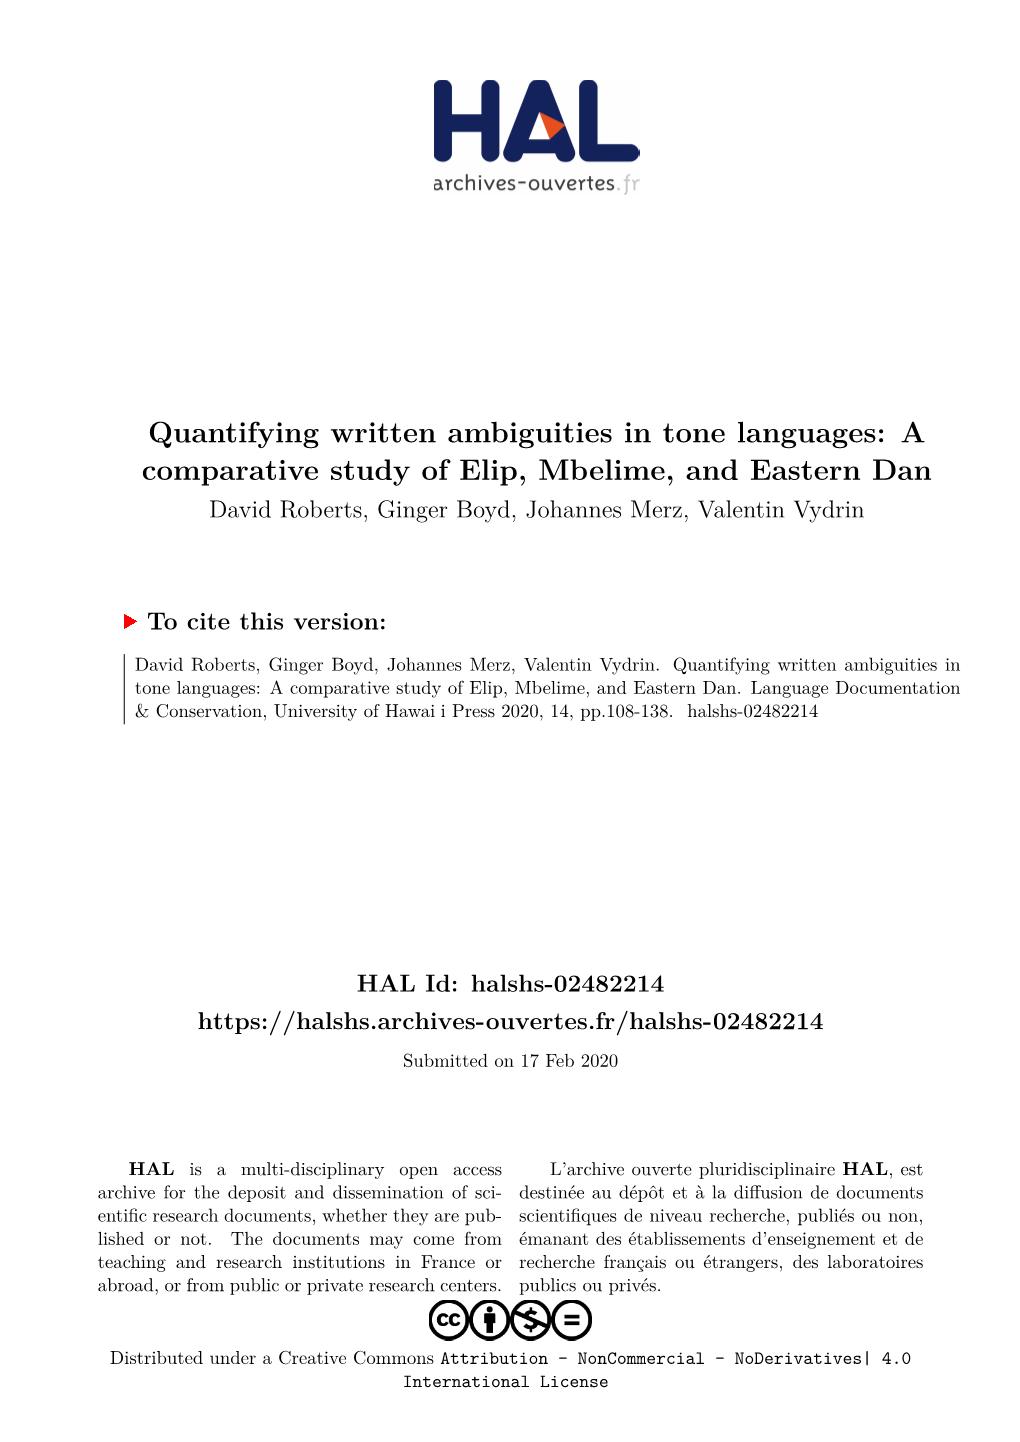 Quantifying Written Ambiguities in Tone Languages: a Comparative Study of Elip, Mbelime, and Eastern Dan David Roberts, Ginger Boyd, Johannes Merz, Valentin Vydrin